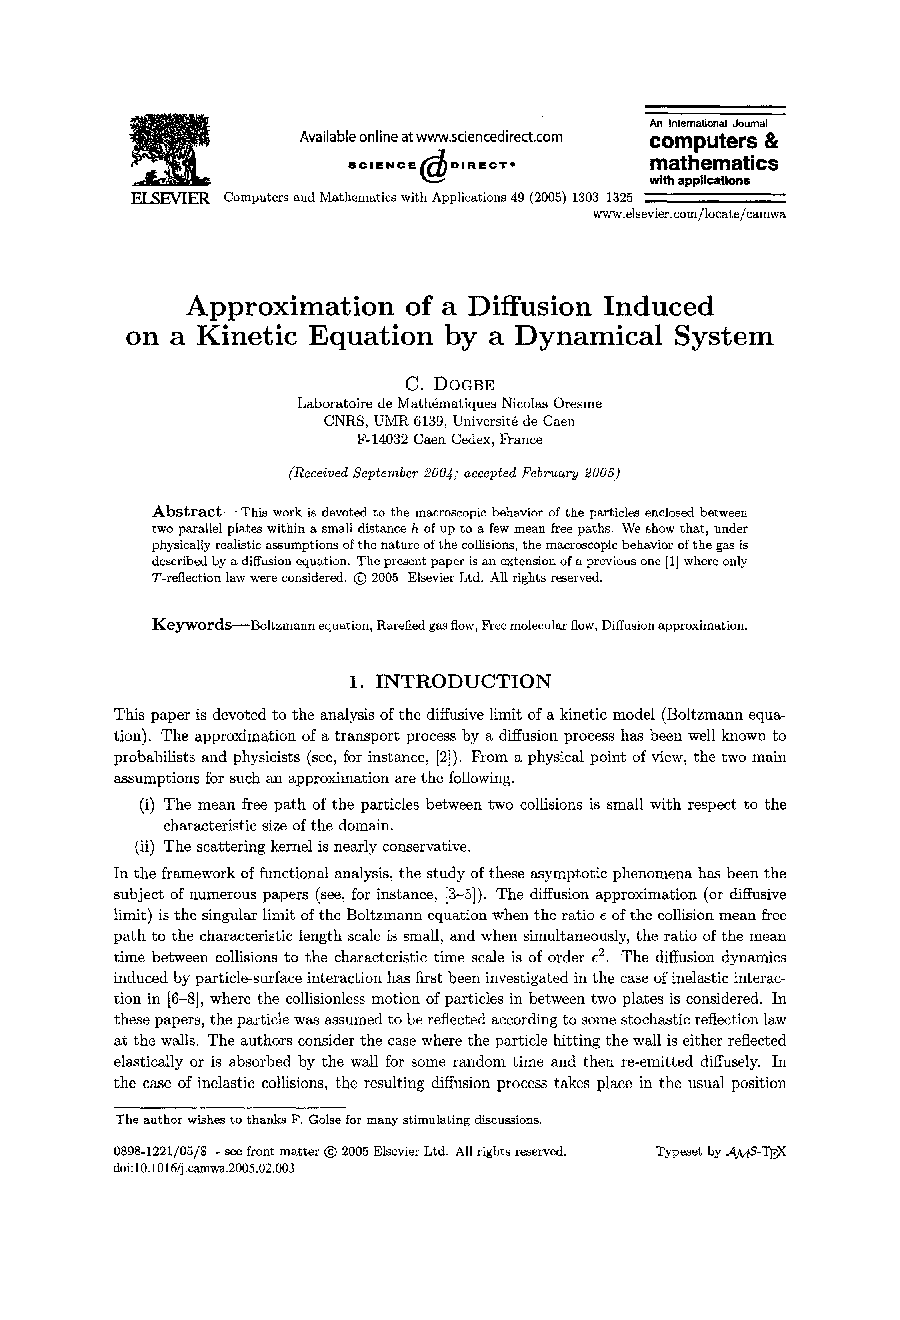 Approximation of a diffusion induced on a kinetic equation by a dynamical system